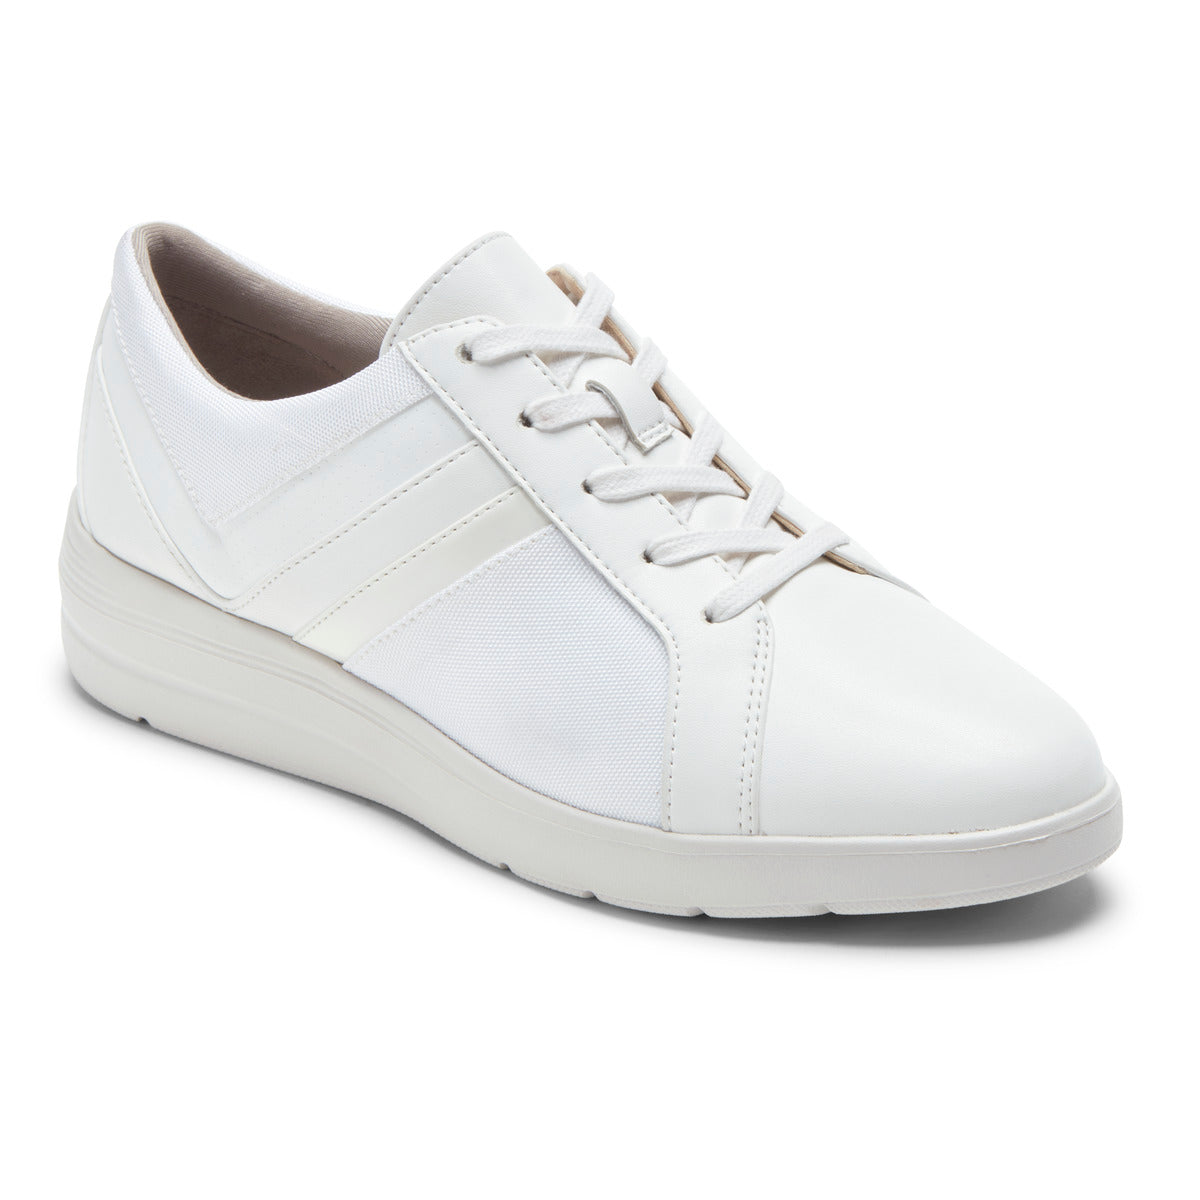 Rockport Womens Total Motion Lillie Sneaker